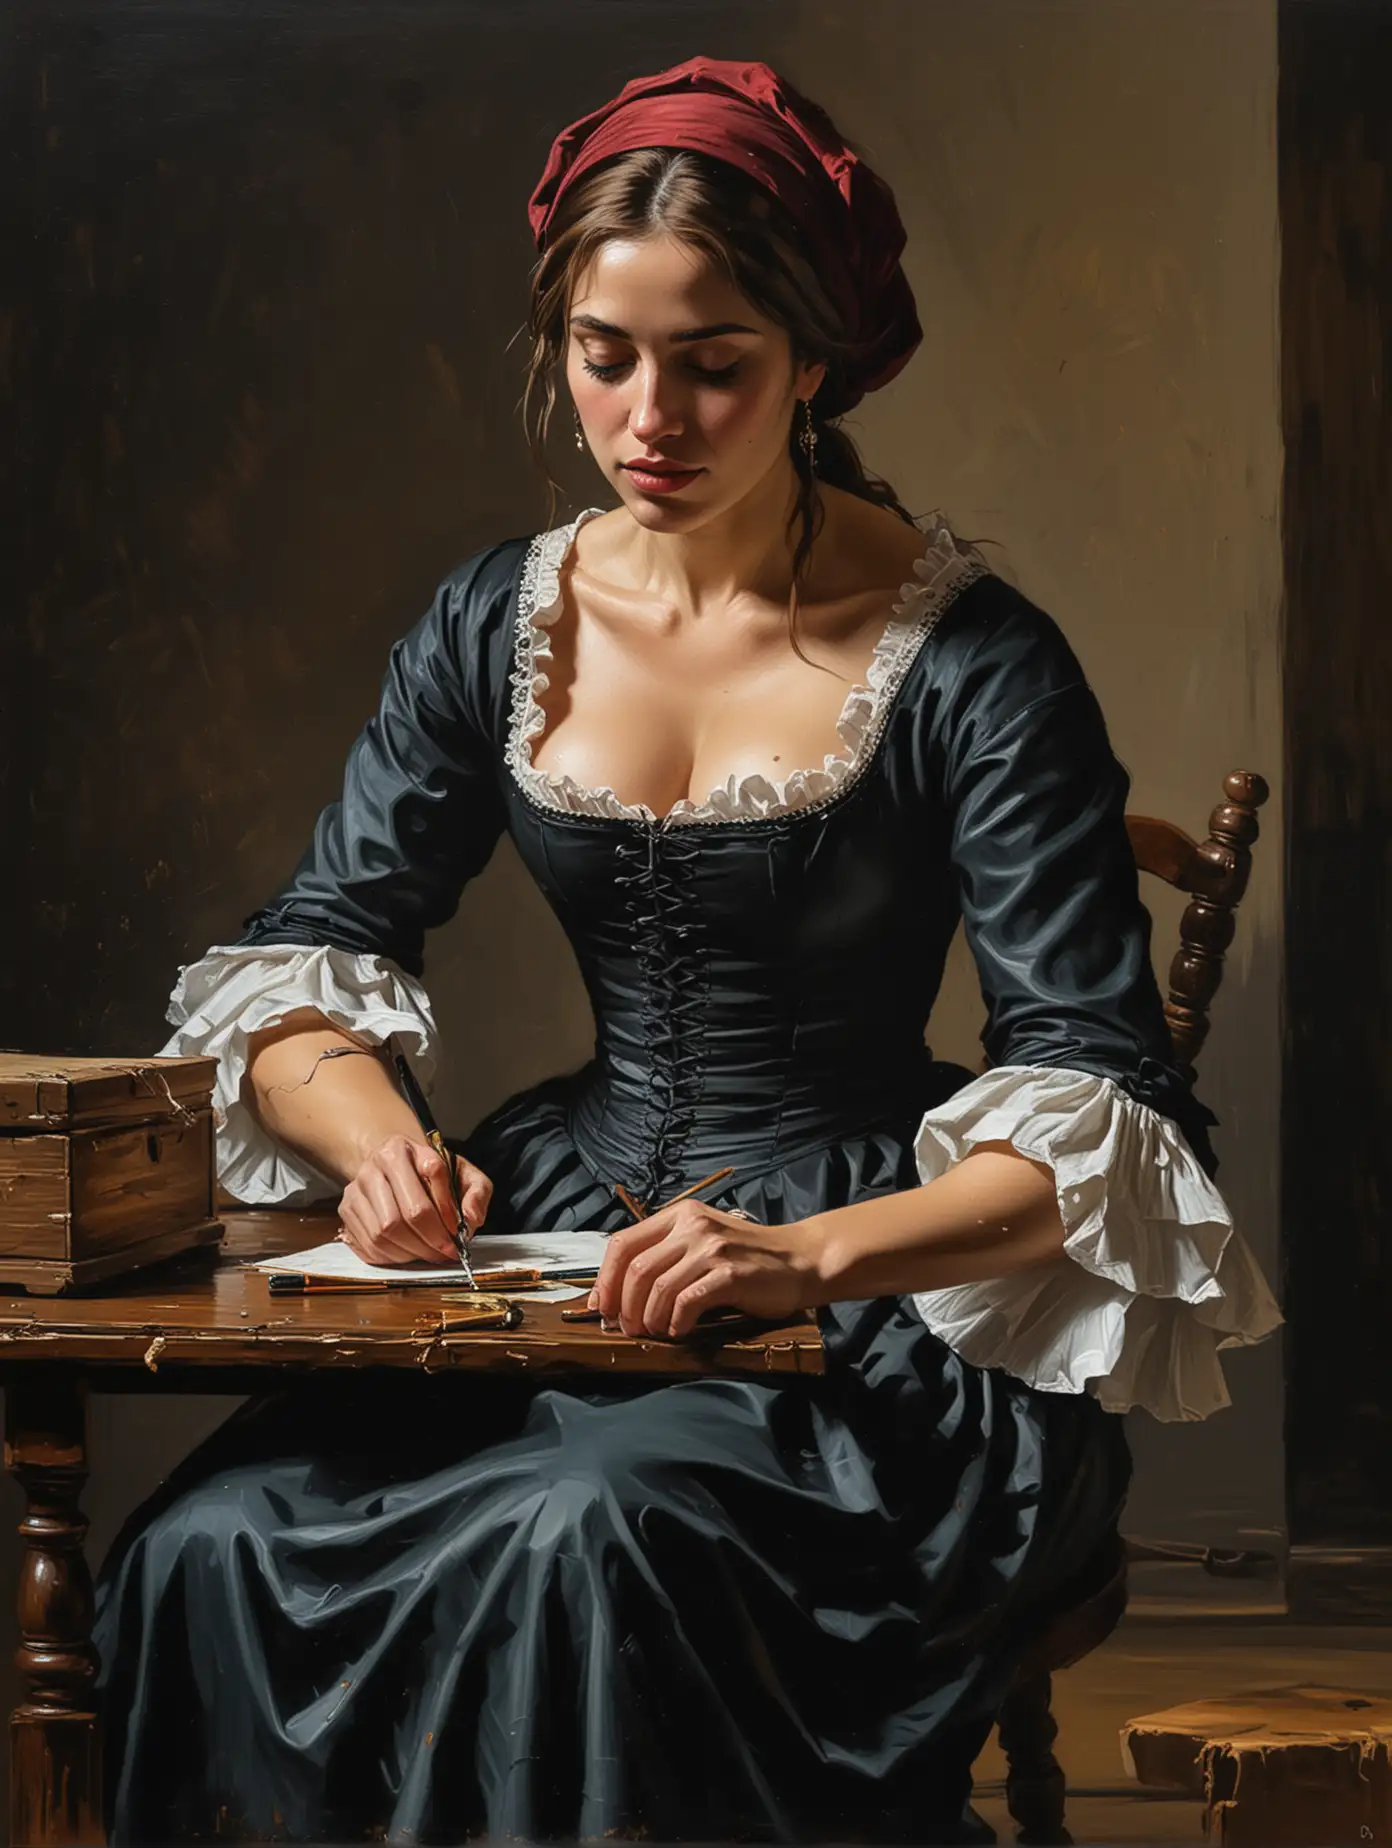 (an expressive painting:1.3), (large strokes style), palette knife style, (Fabian Perez style:1.3) , " The Lacemaker by Johannes Vermeer " depicted in the (17th century:1.3)